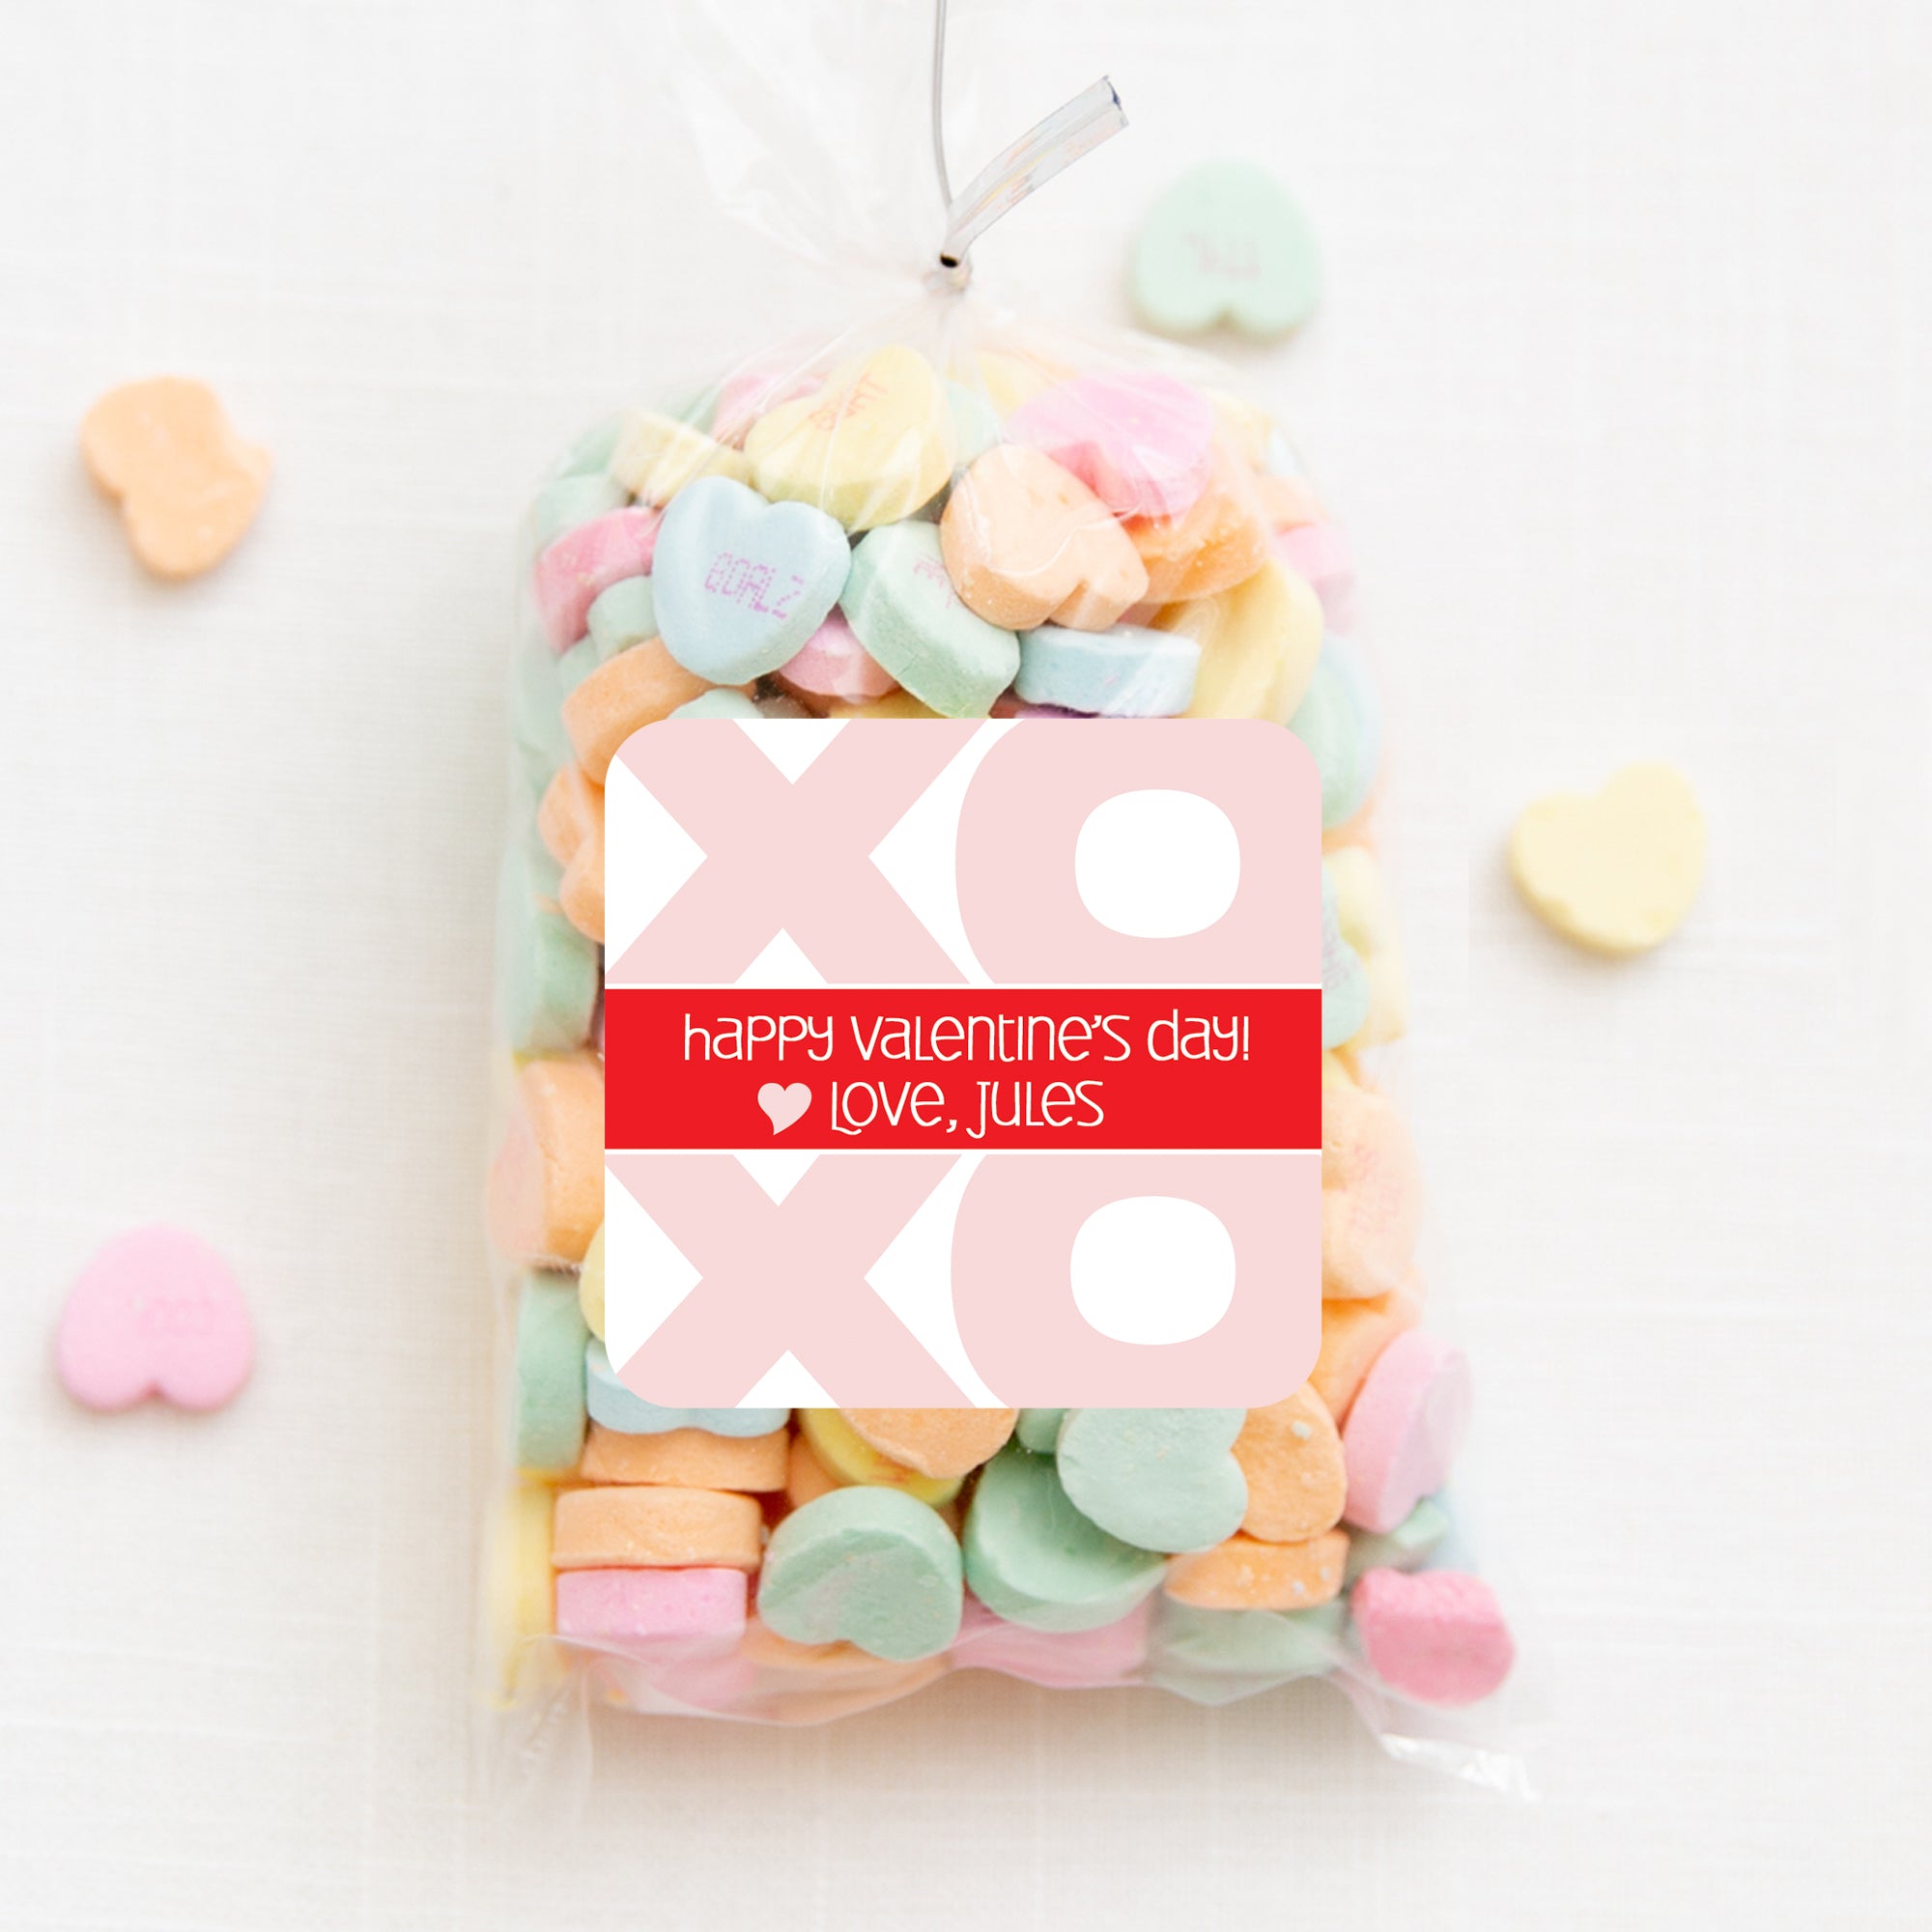 Bold XOXO Valentine's Day sticker | 2.5" Round Valentine's Day Sticker for candy bag | Classroom Party | Personalized stickers | PIPSY.COM